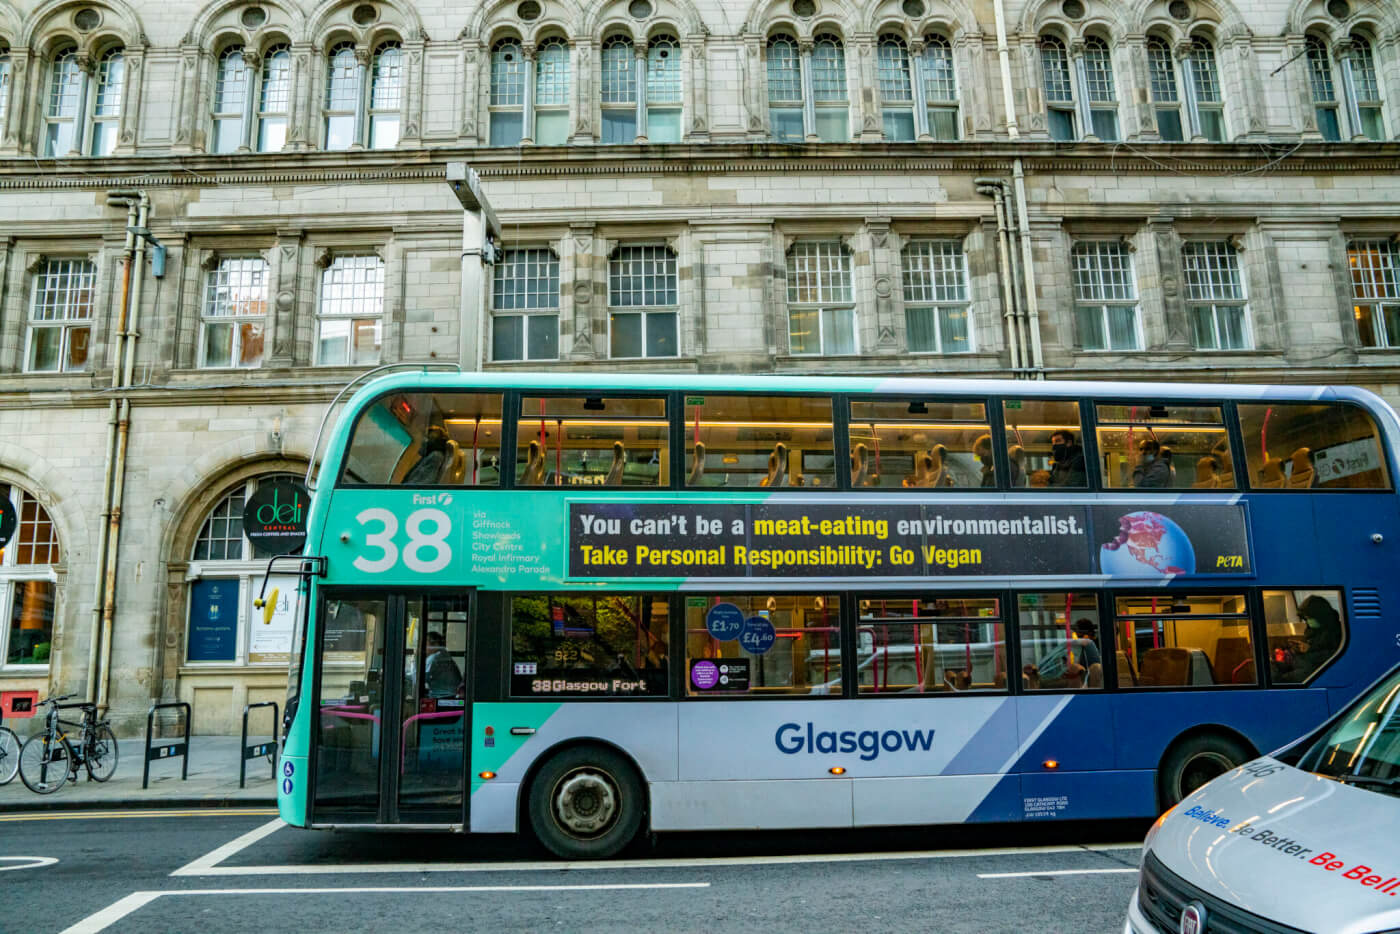 A bus in Glasgow with a PETA UK ad which reads "You can't be a meat-eating environmentalist. Take Personal Responsibility: Go Vegan."